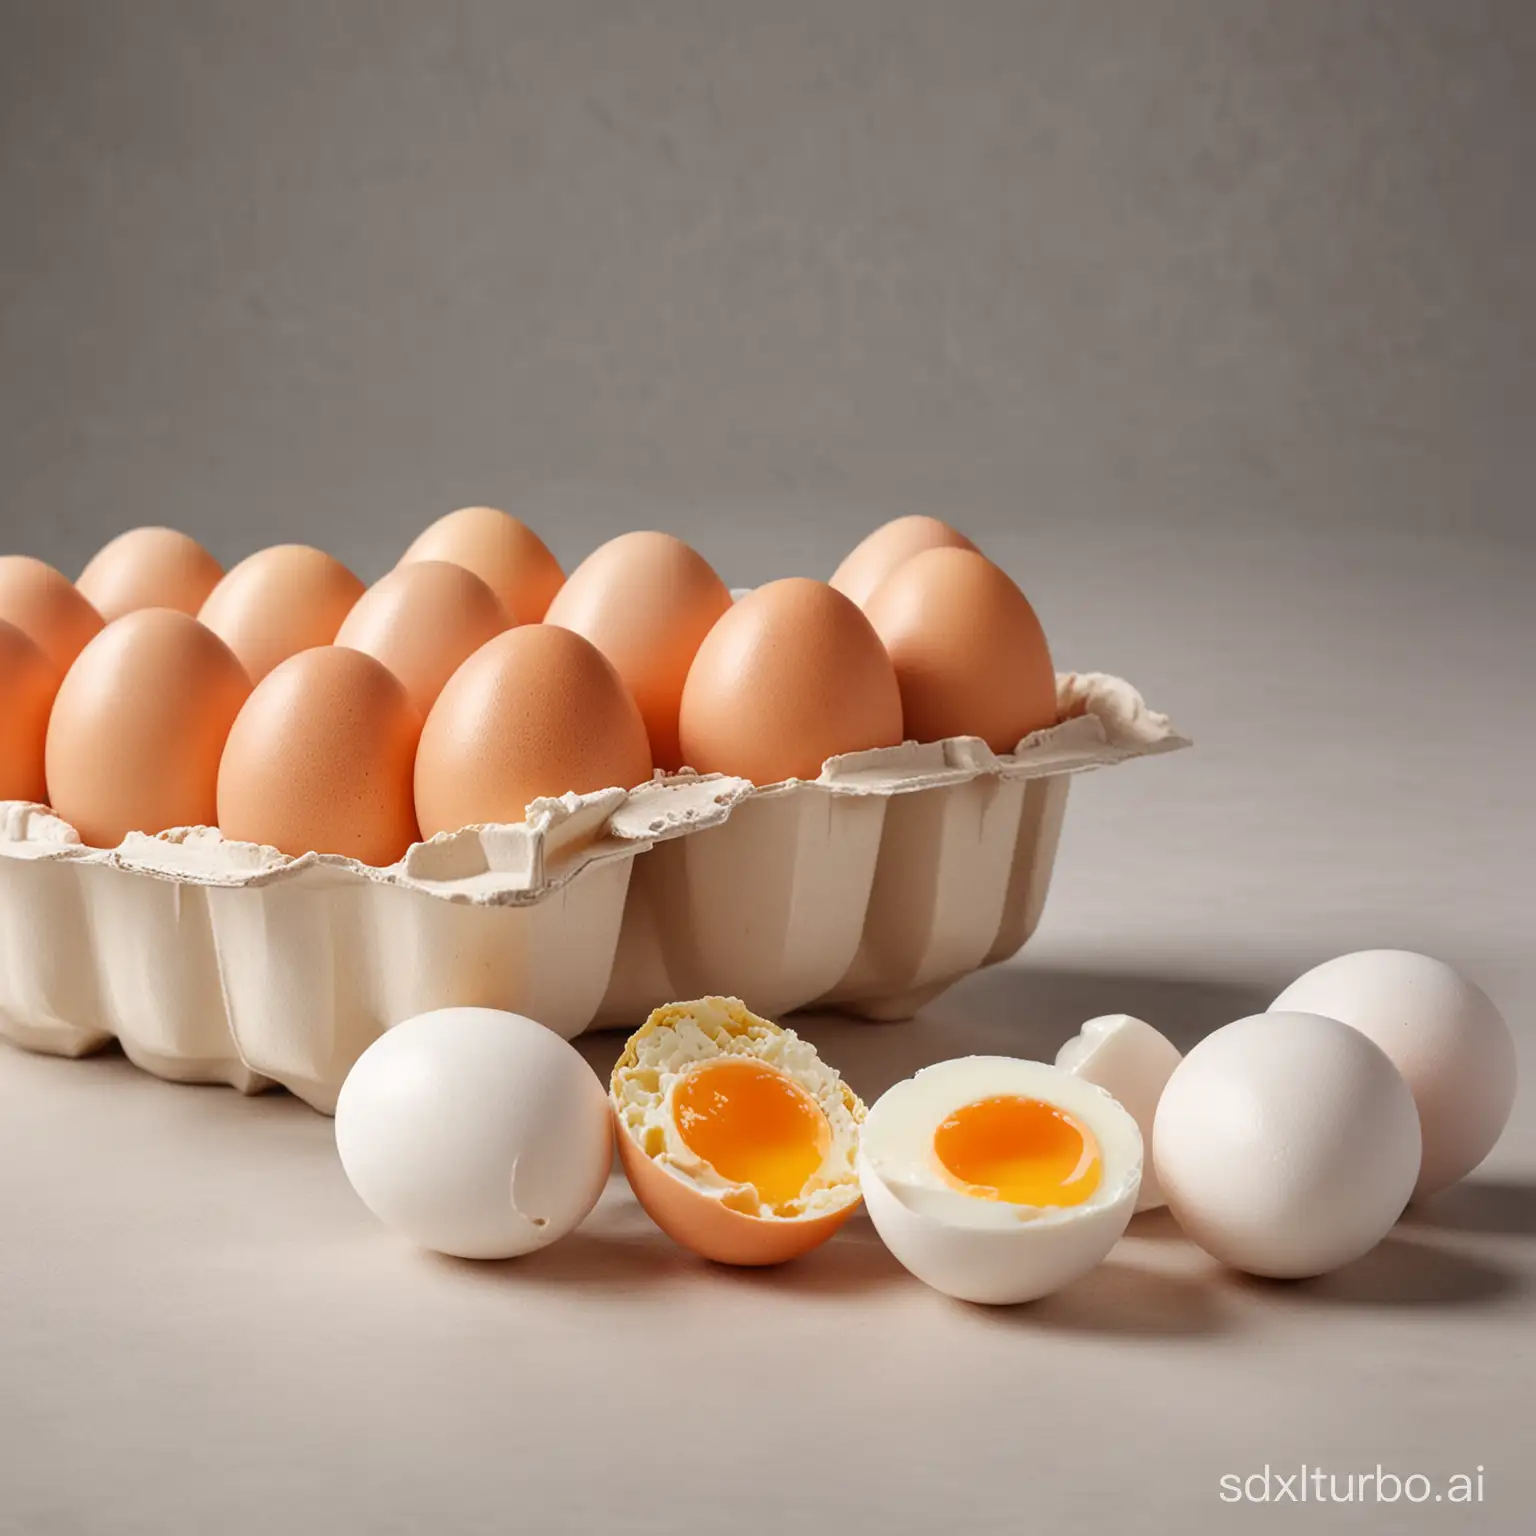 Professional-Product-Photography-of-Whole-Eggs-and-Separated-Yolks-in-Egg-Cartons